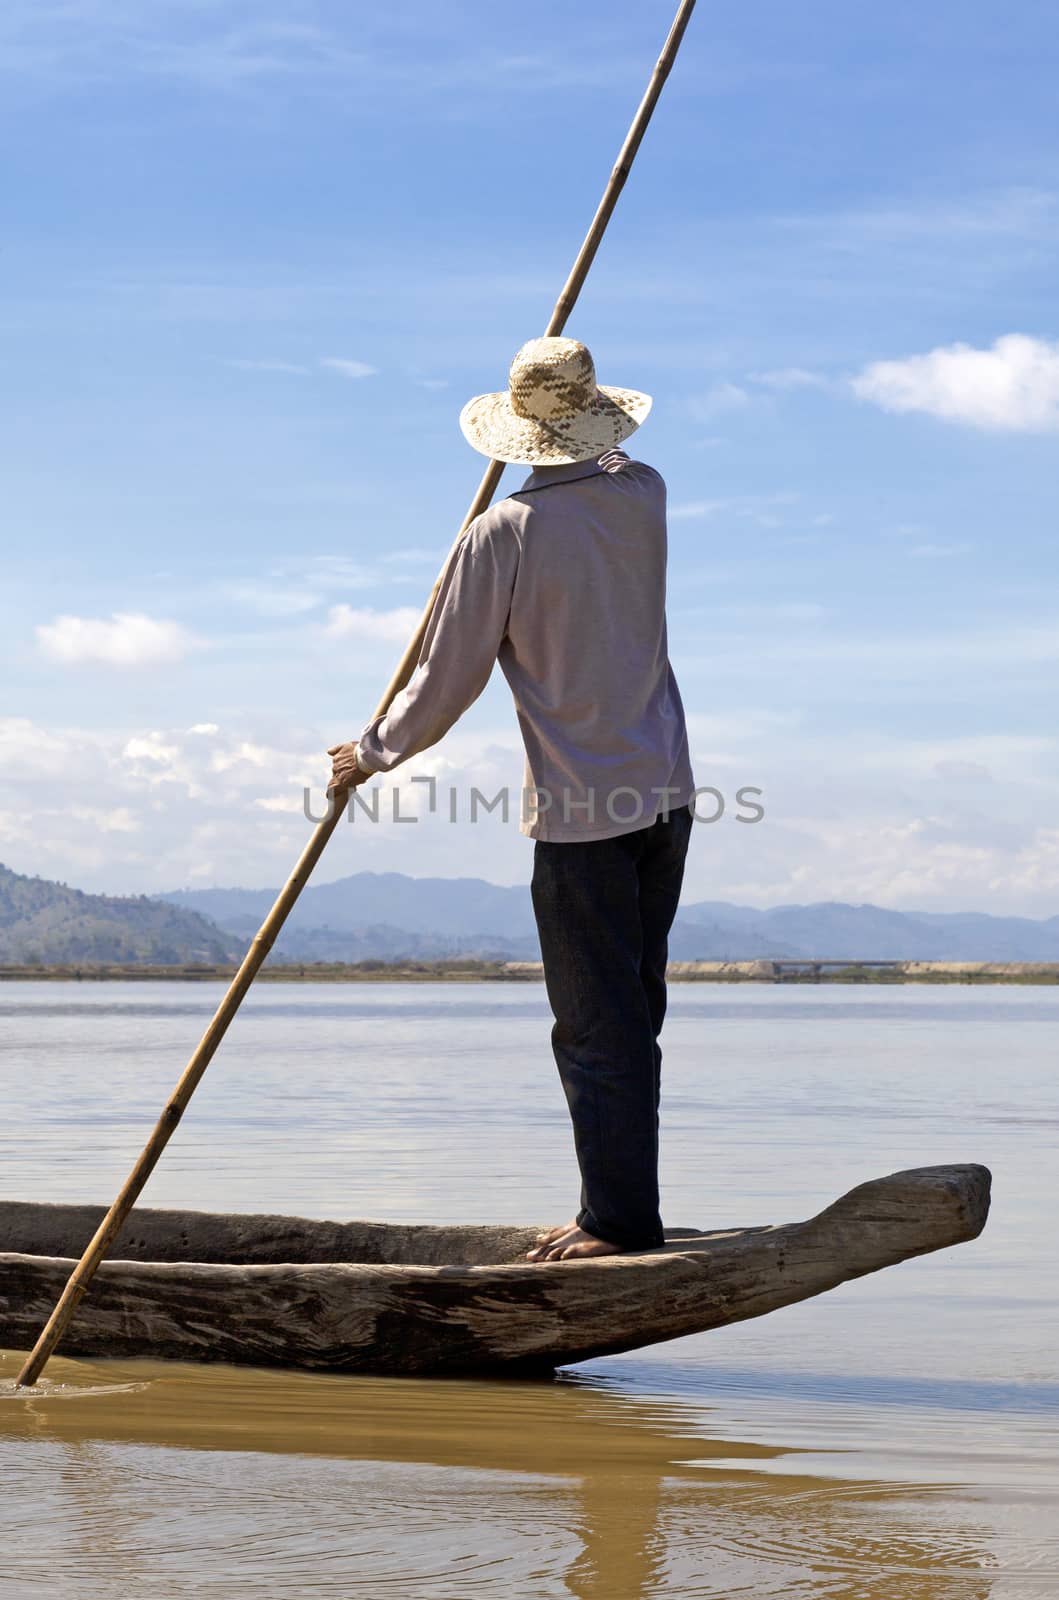 Dak Lak, VIETNAM - JANUARY 6, 2015 - Man pushing a boat with a pole by Goodday